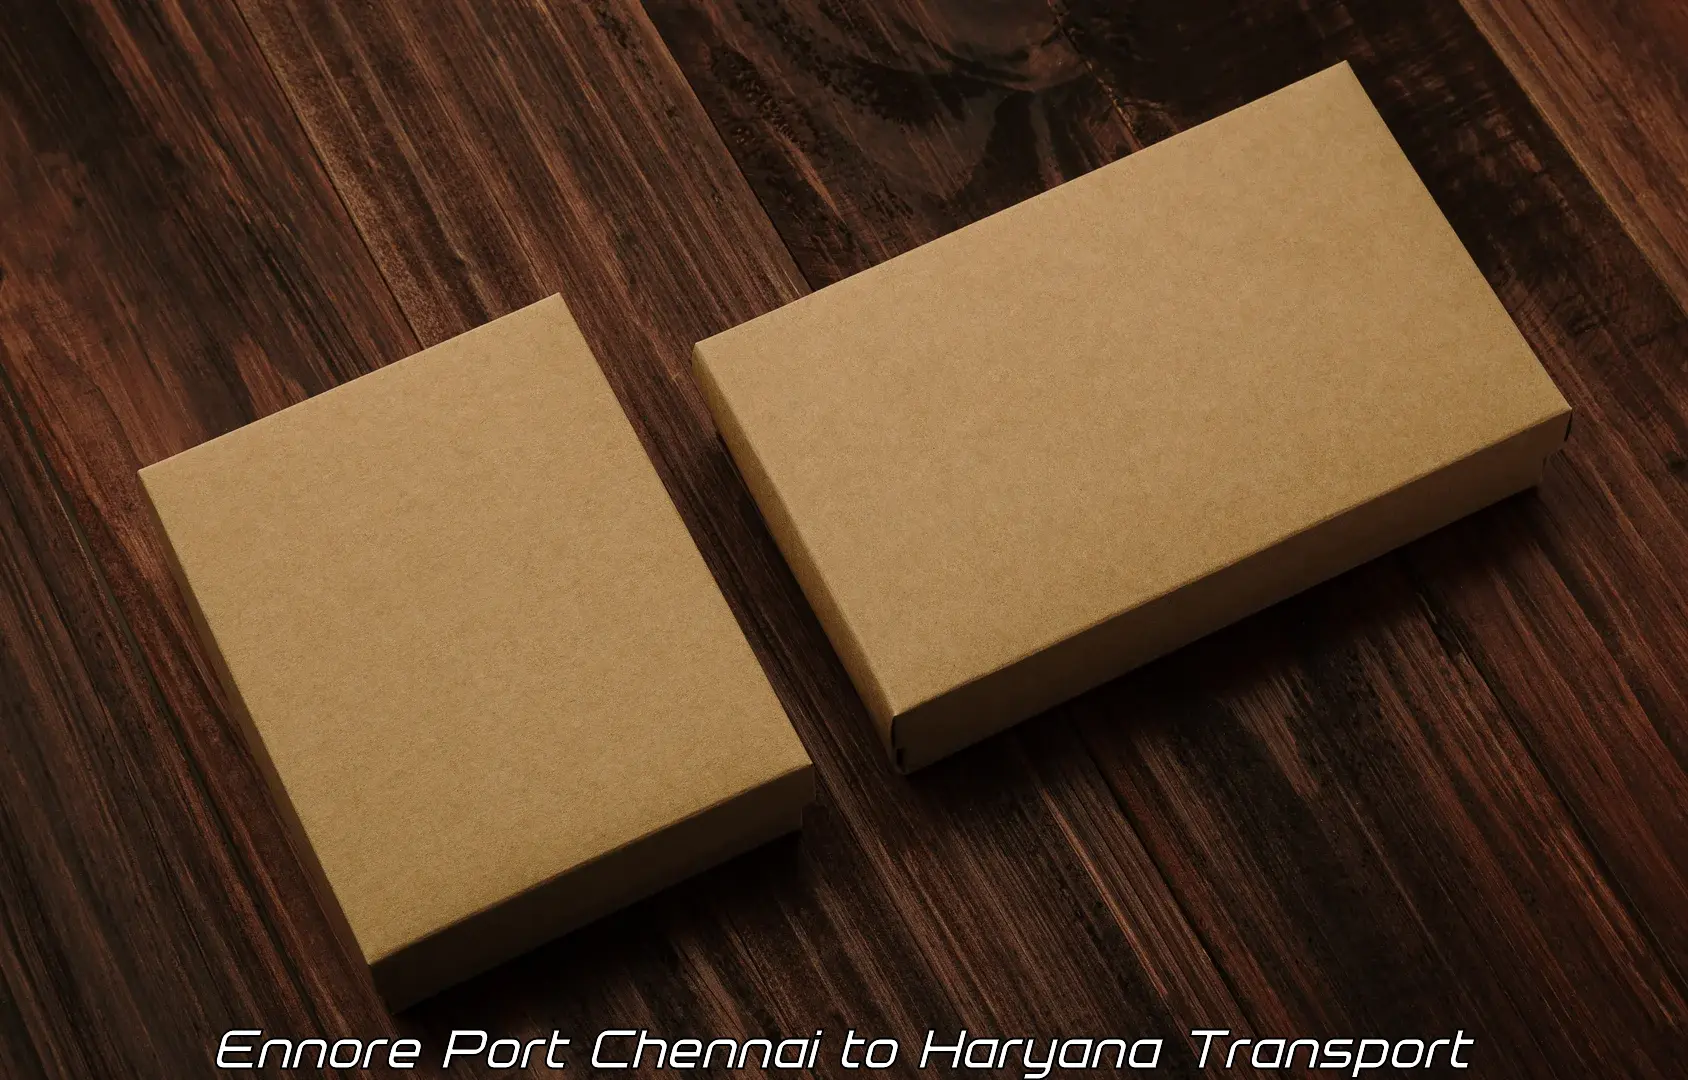 Transport shared services Ennore Port Chennai to Kaithal